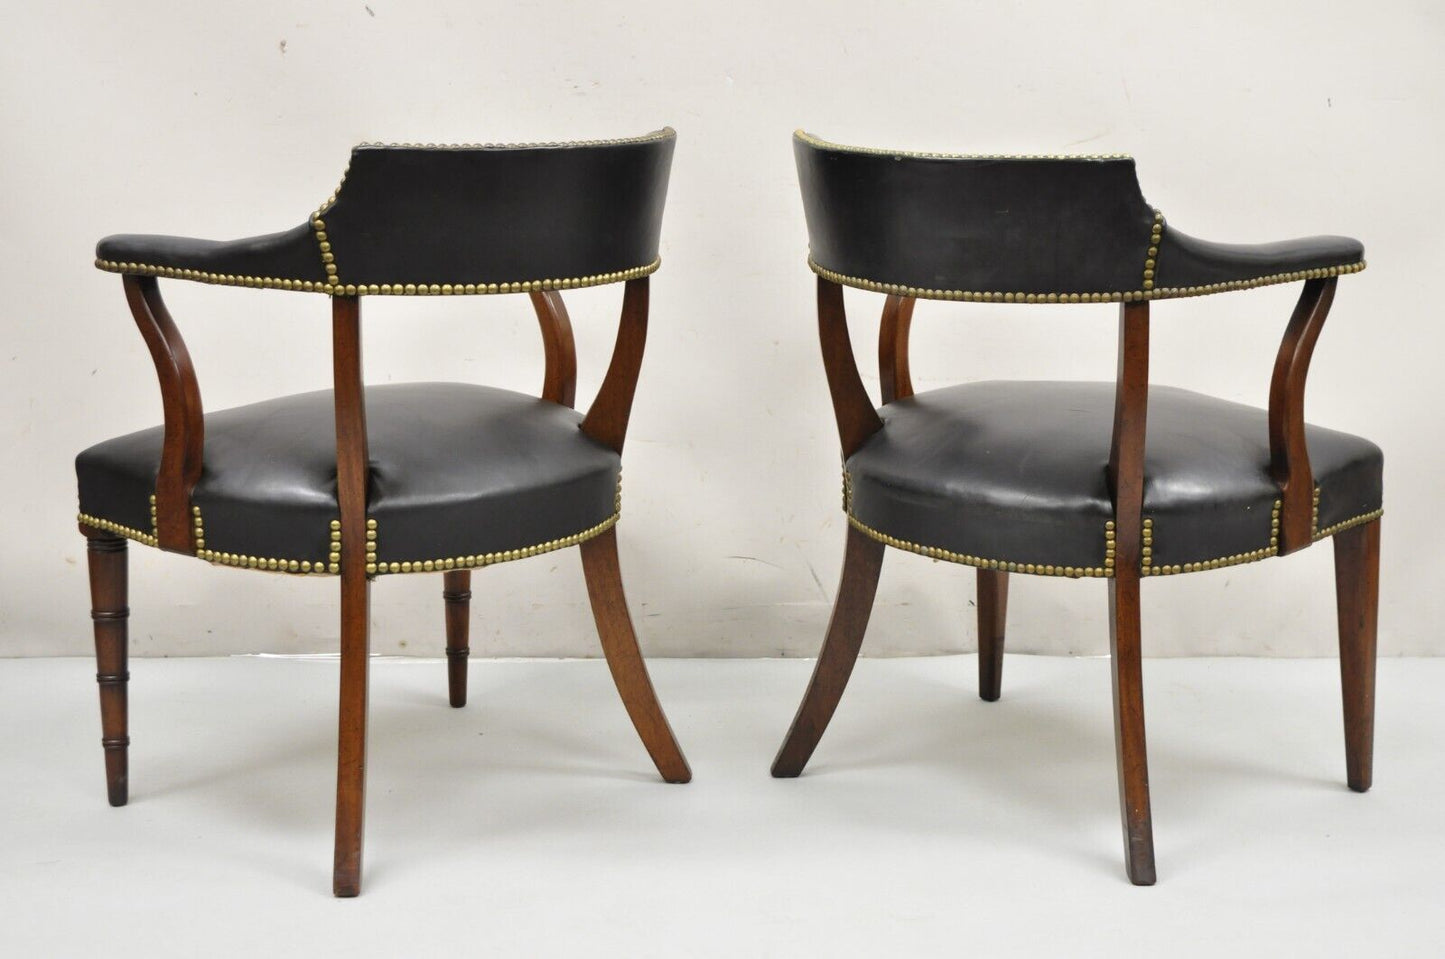 Hickory Chair Co Regency Style Mahogany & Black Leather Club Arm Chairs - a Pair